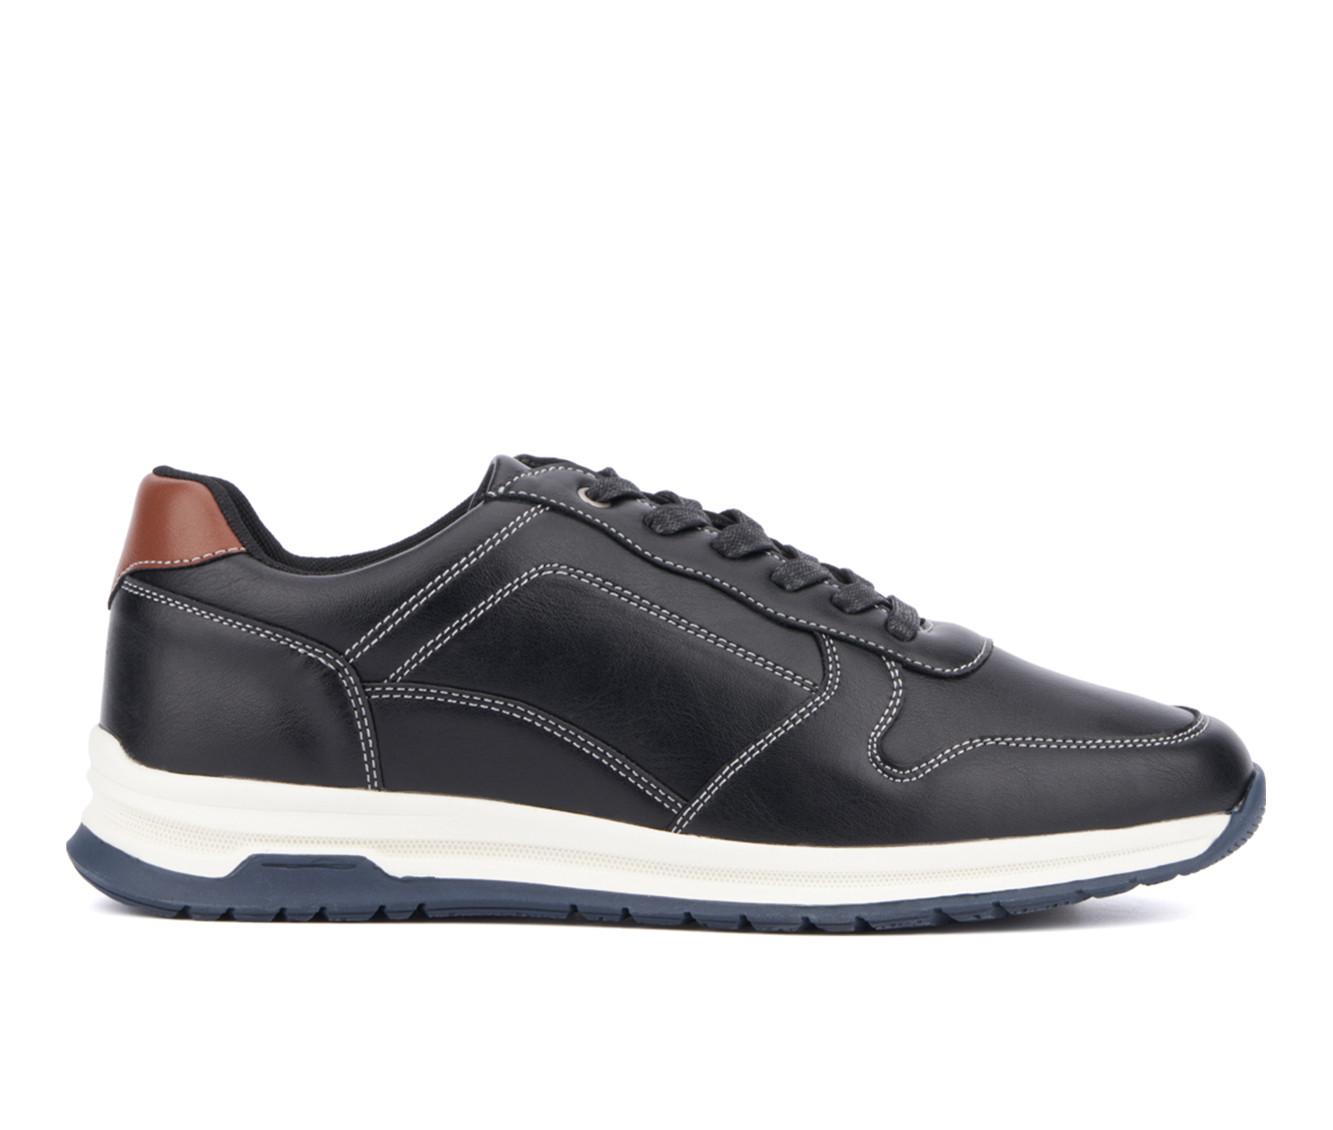 Men's New York and Company Haskel Casual Oxfords